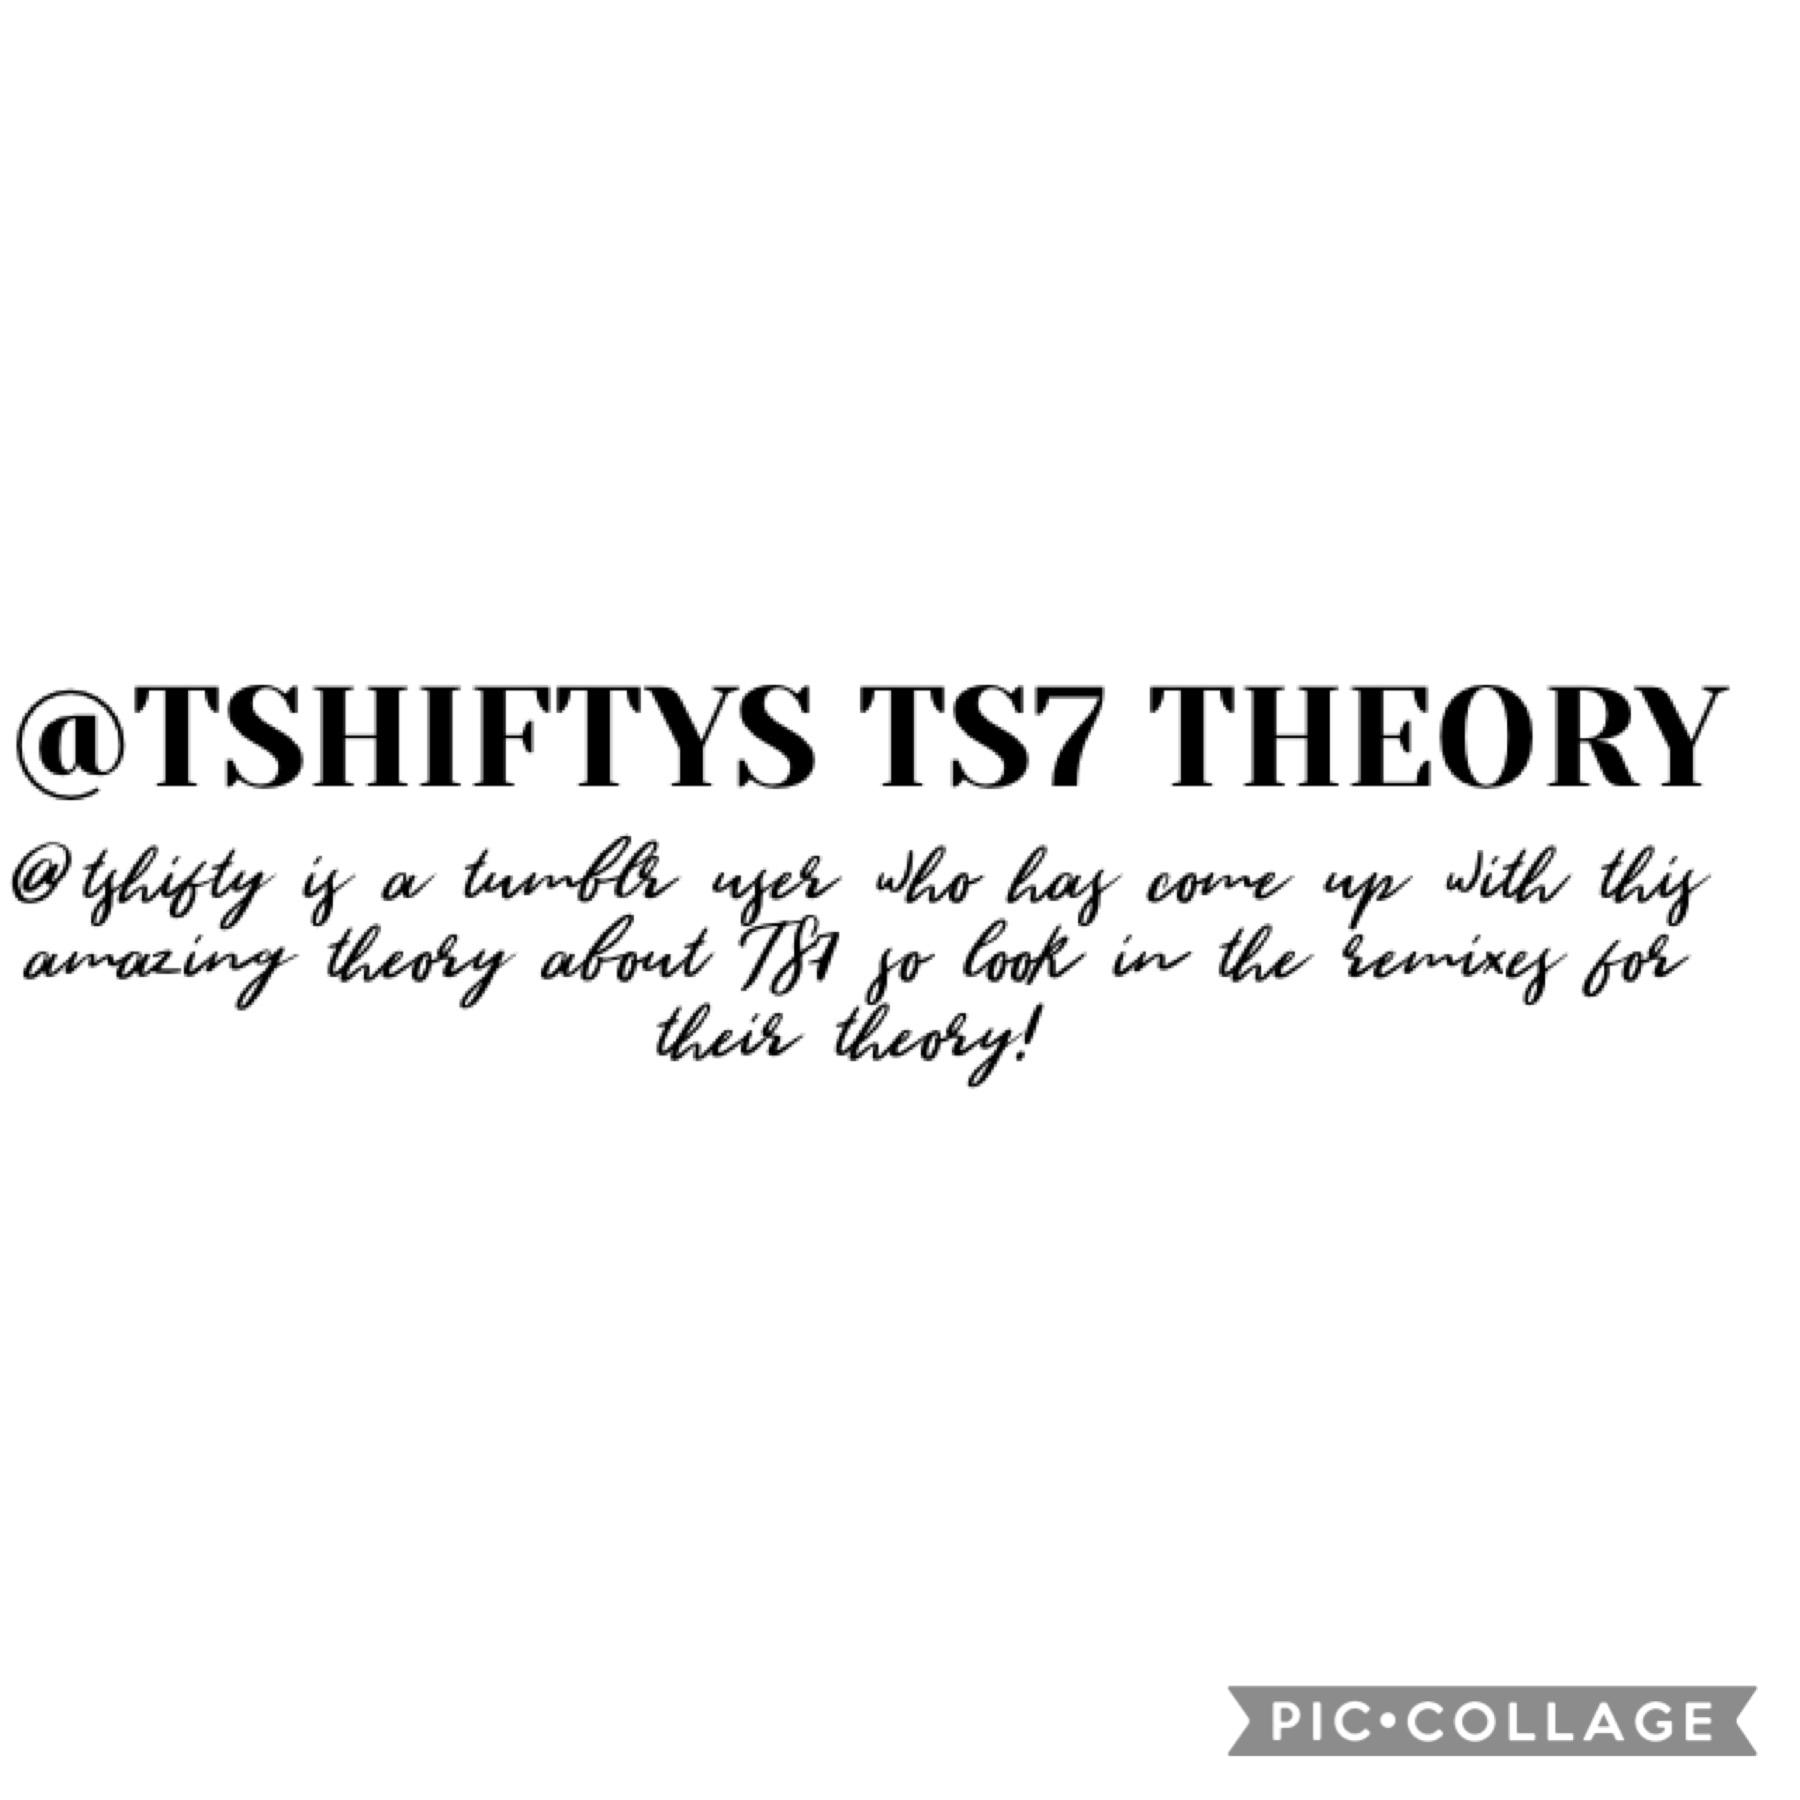 I found this amazing TS7 theory on tumblr - it’s all in the remixes! 

Rhianna 
@lostintranslation